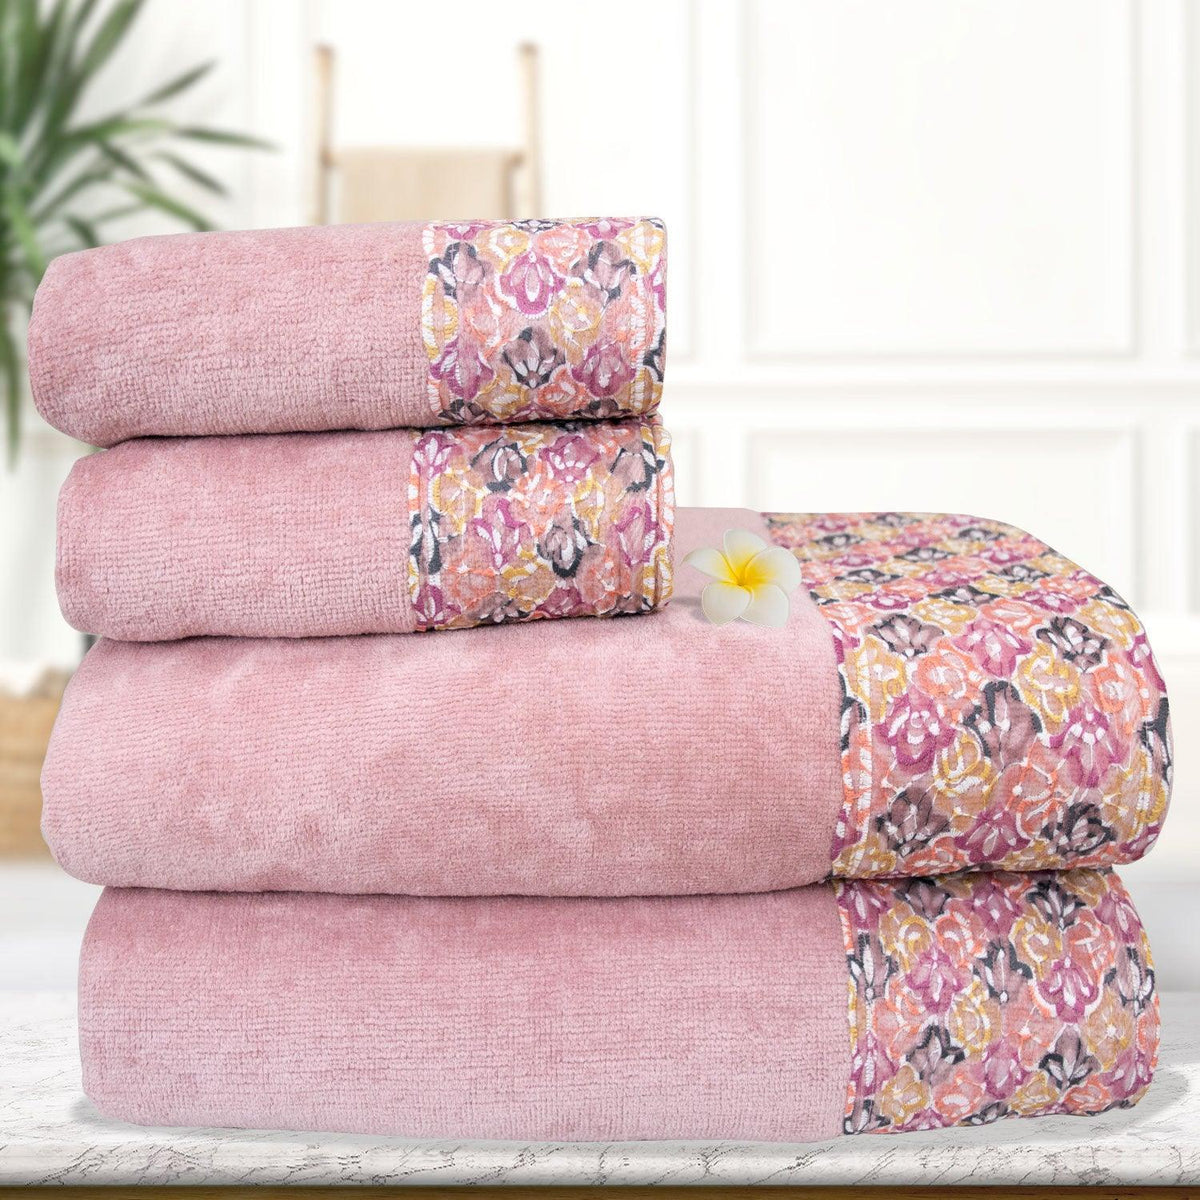 Prima Lace 100% Cotton Bath and Hand Towel Set of 4 | Ultra Soft, Highly Absorbent Luxurious Towels - Rangoli